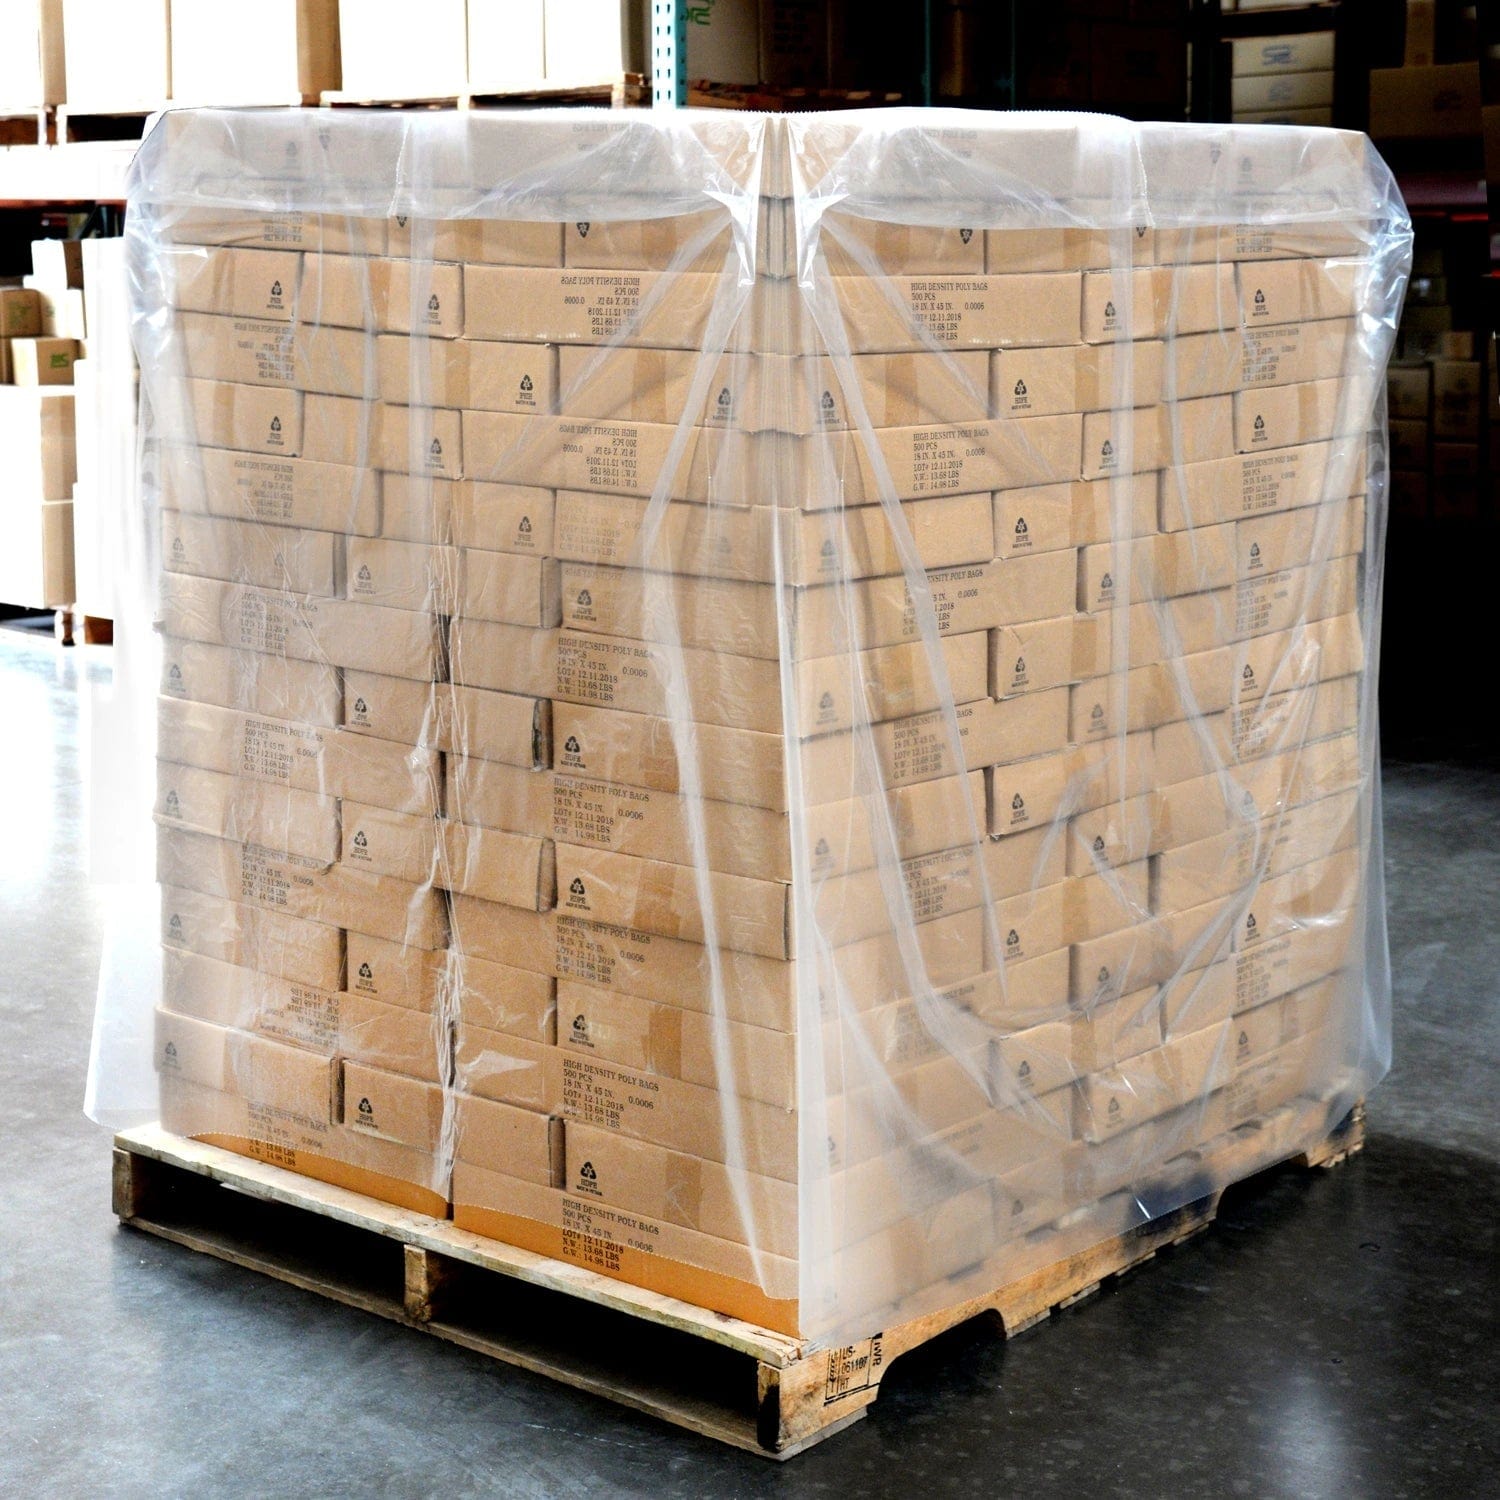 Covered and Secure: The Impact of Pallet Covers on Product Integrity